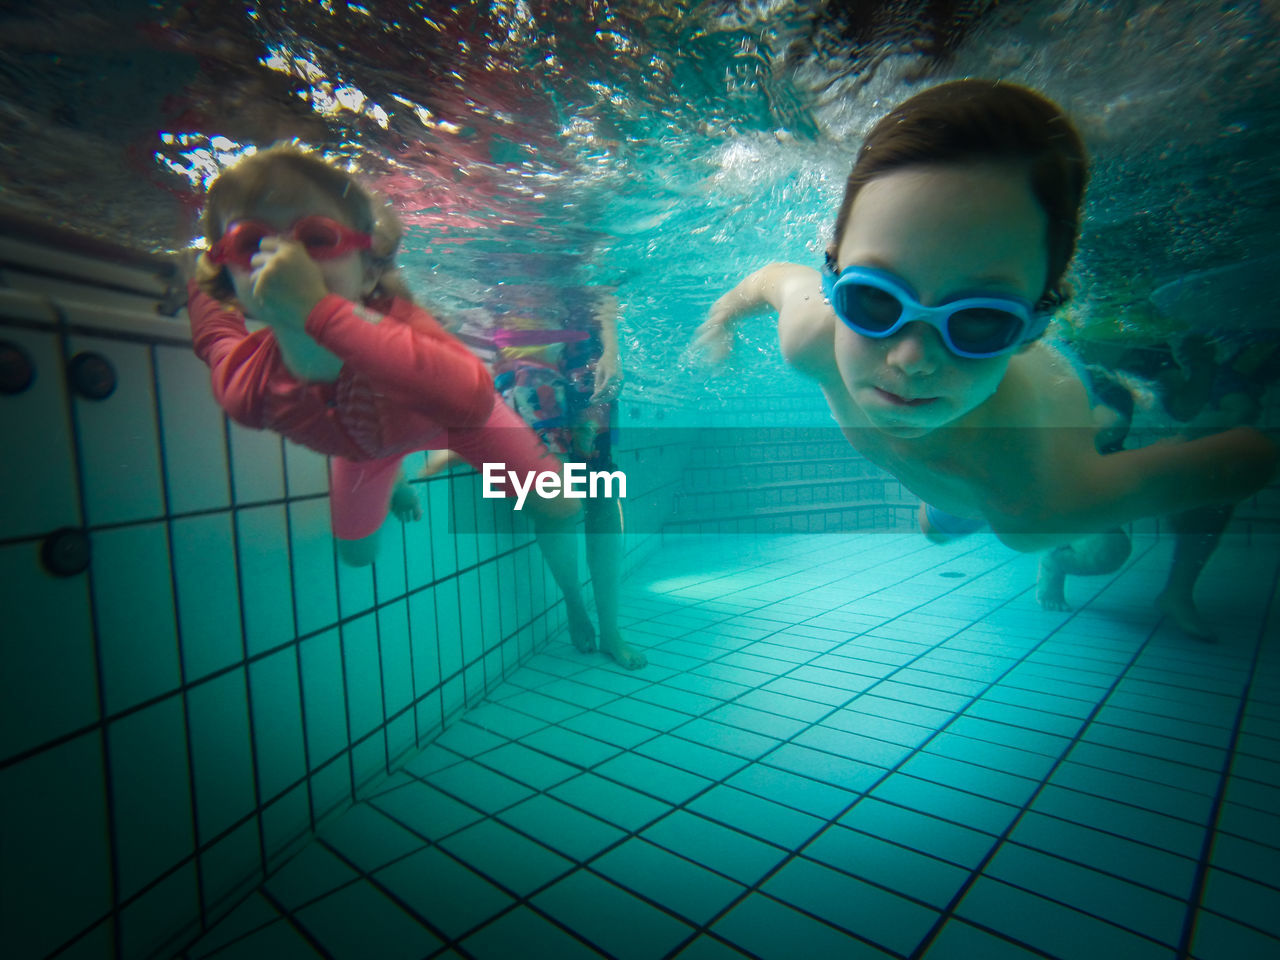 A boy and a girl swimming underwater in a pool 